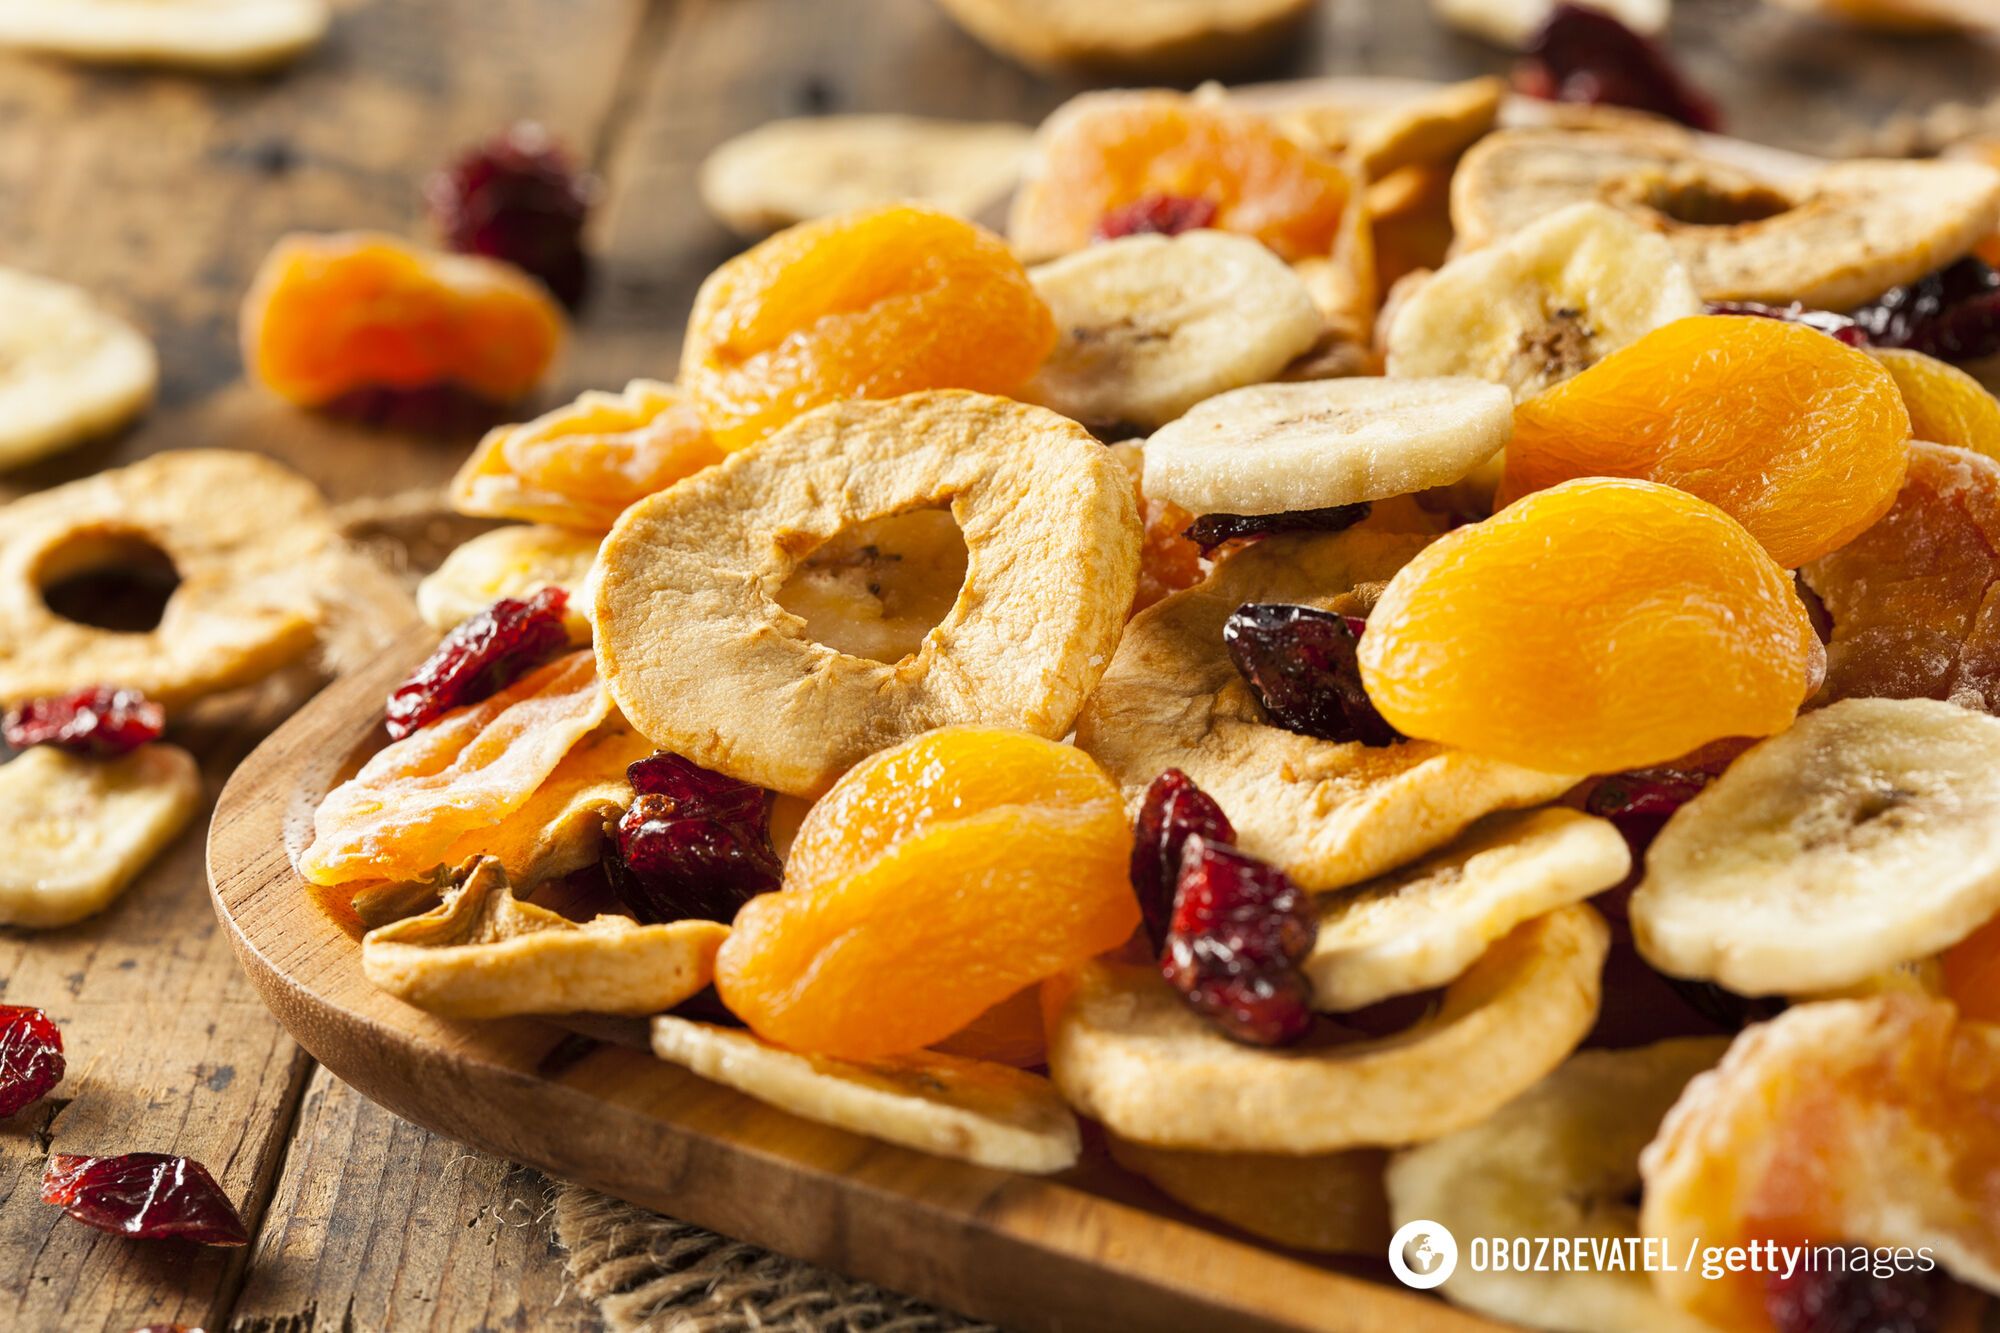 Dried fruits are high in calories